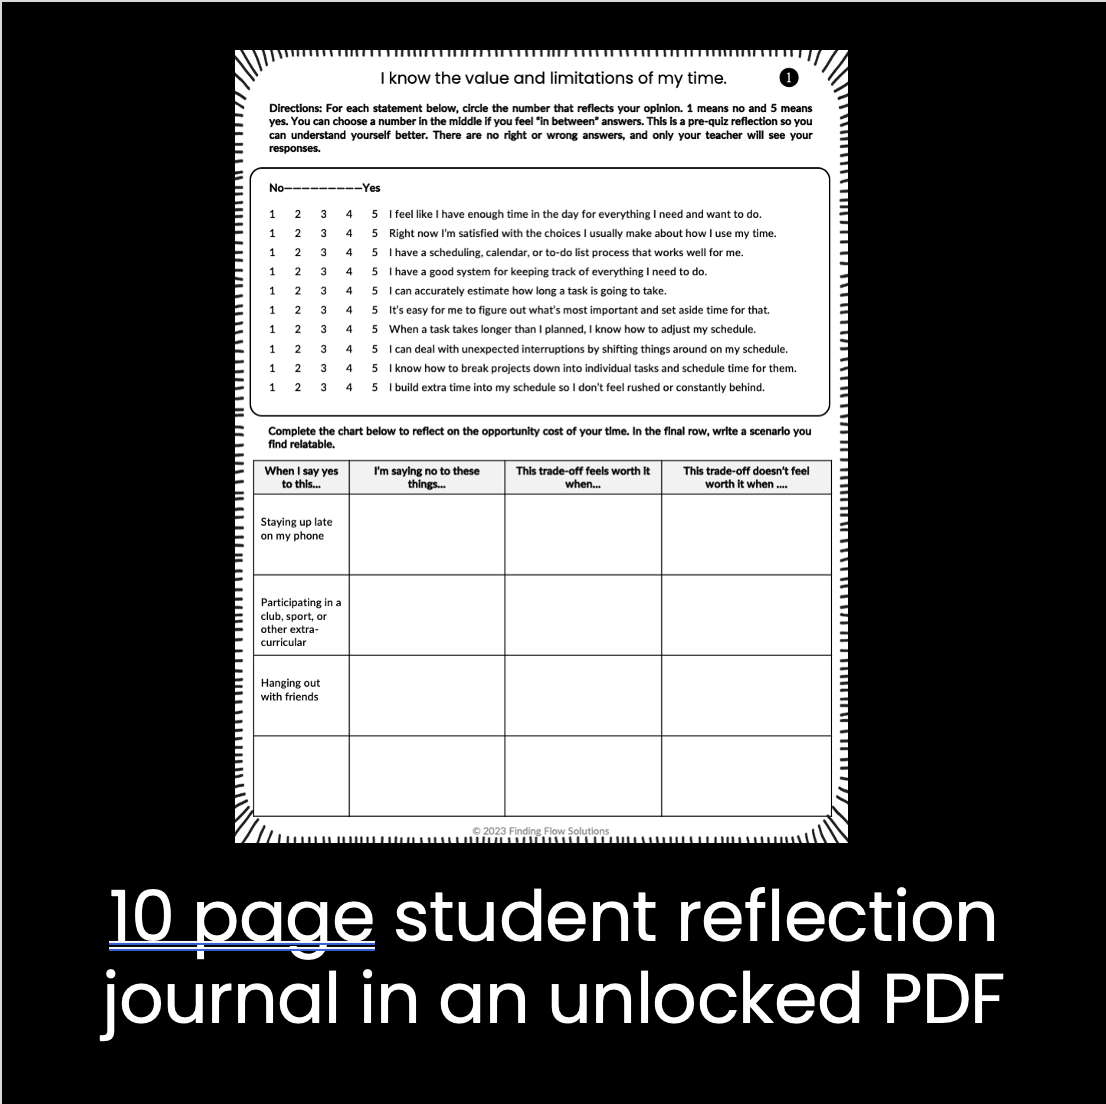 Time Management Unit: 10 lessons with PPT and student journals